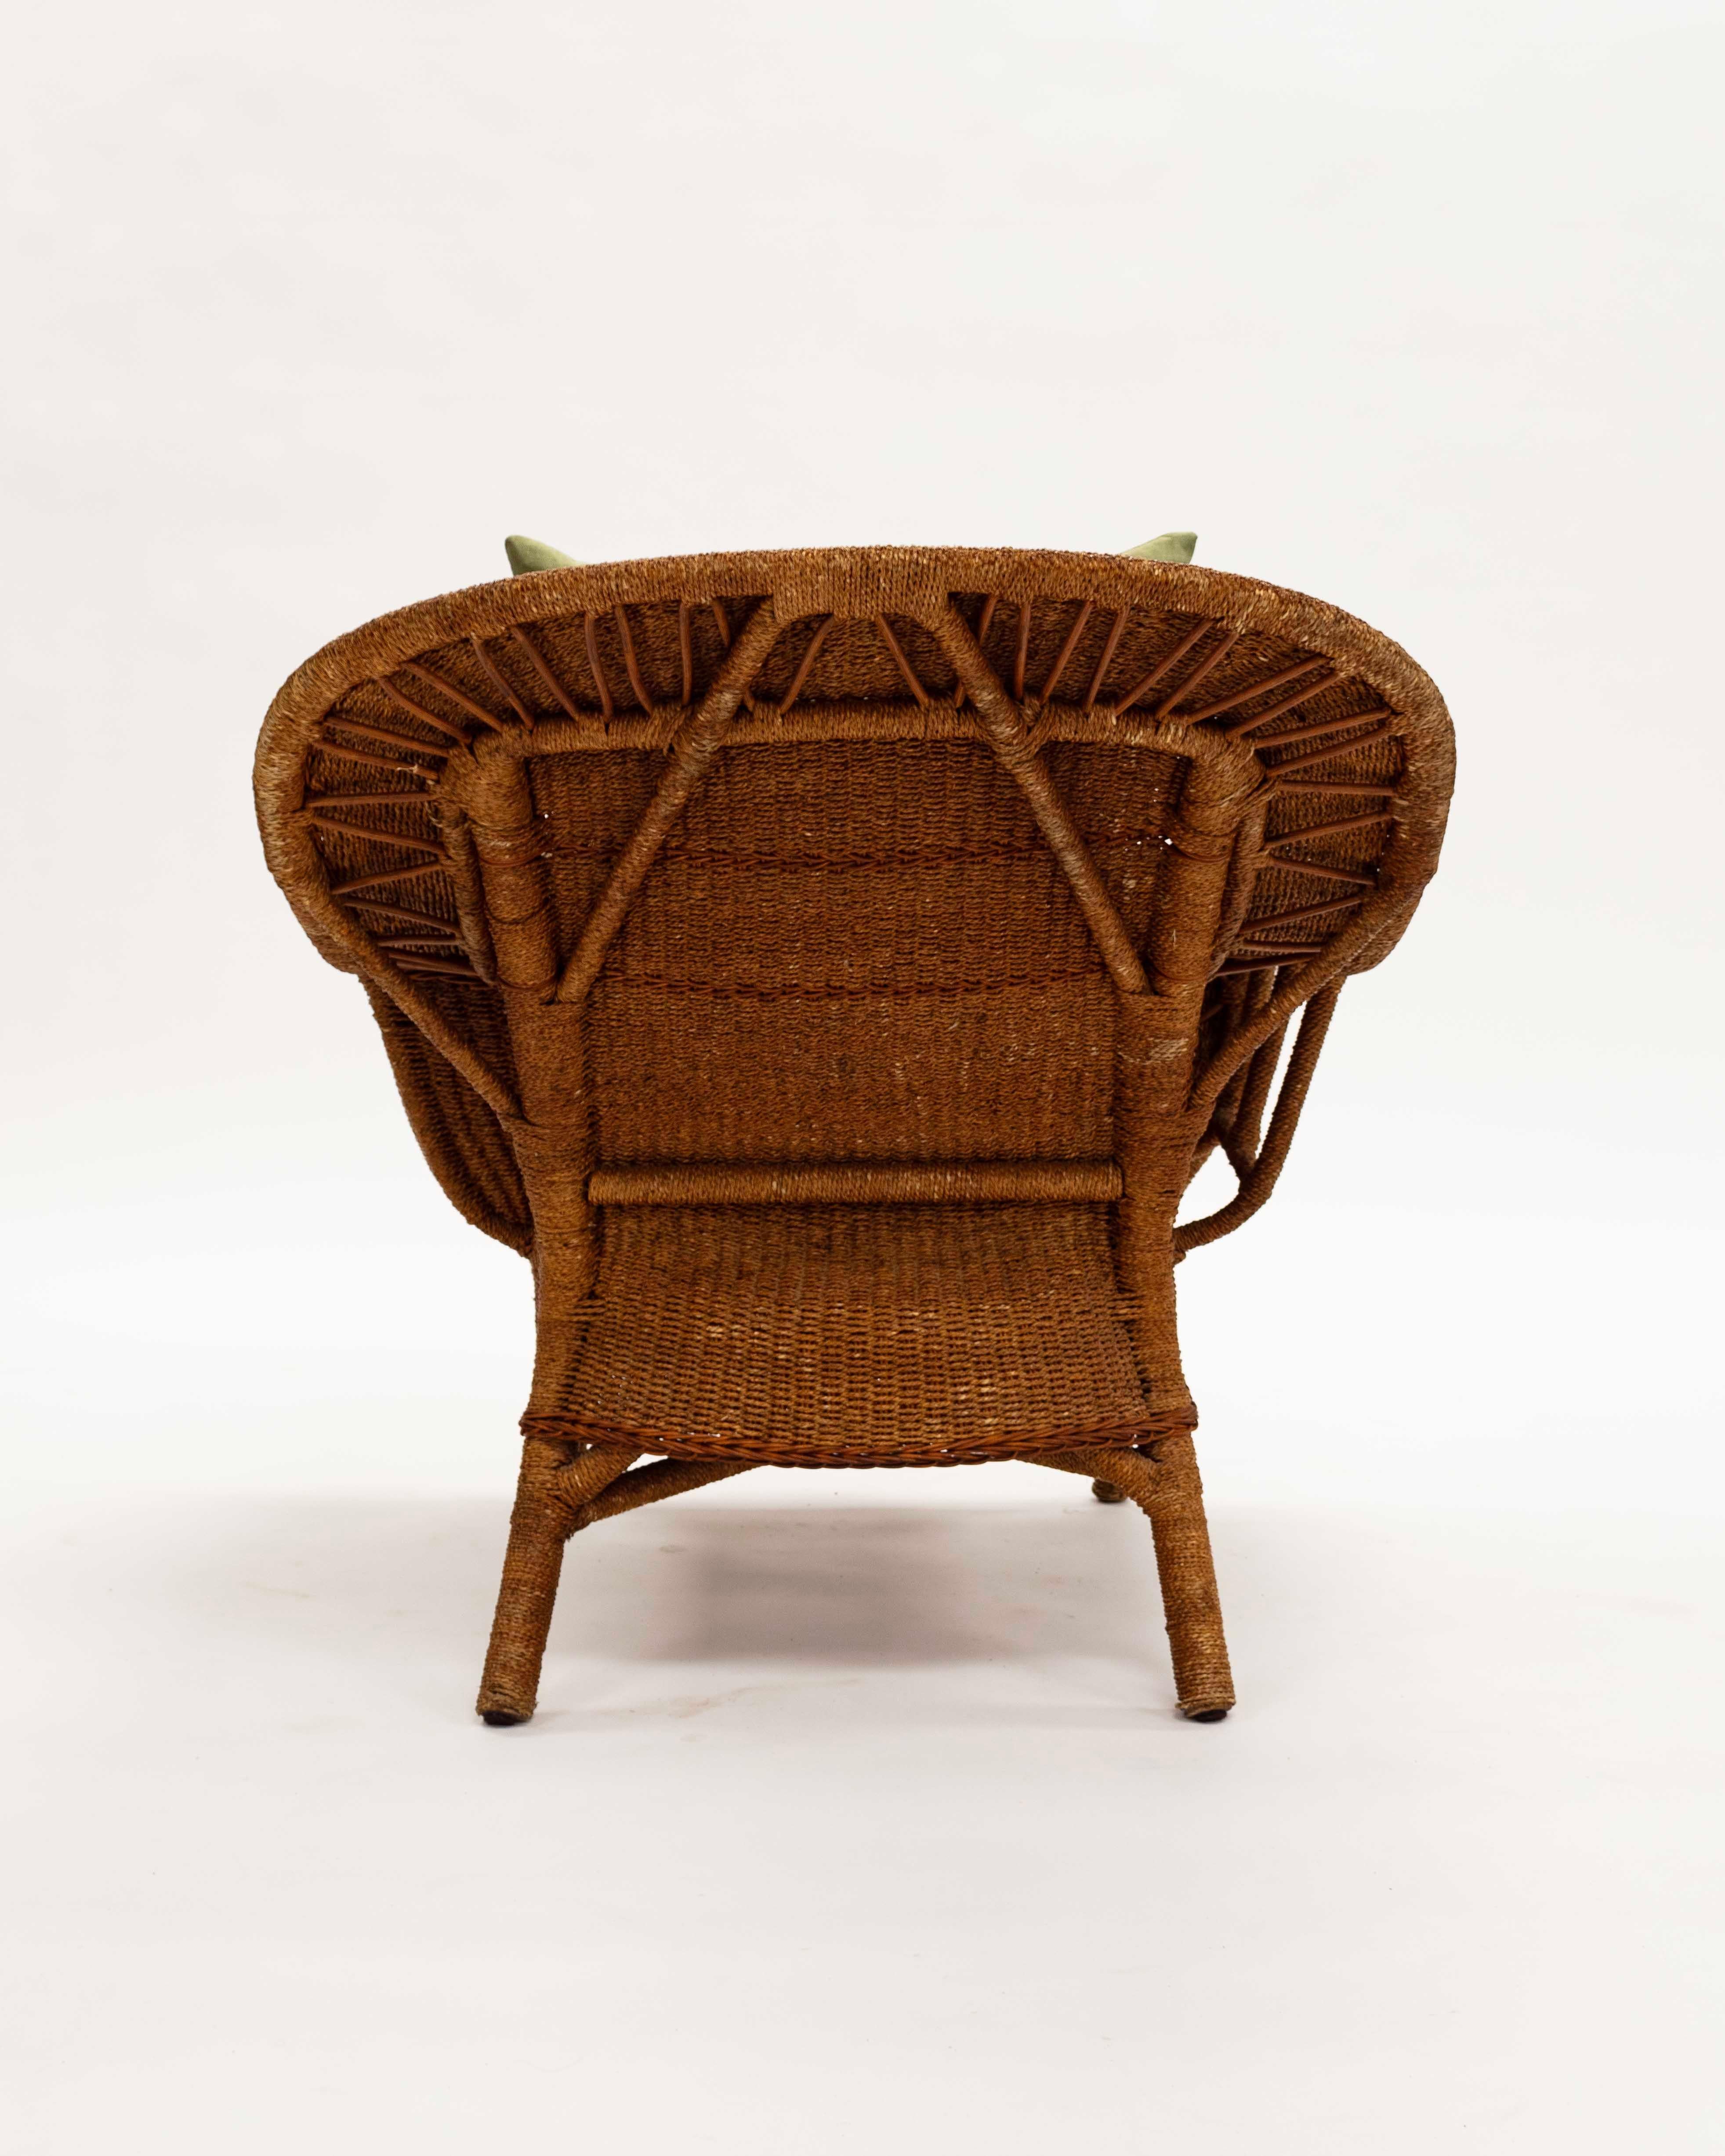 Woven Seagrass Large Chair and Ottoman In Fair Condition For Sale In New York, NY